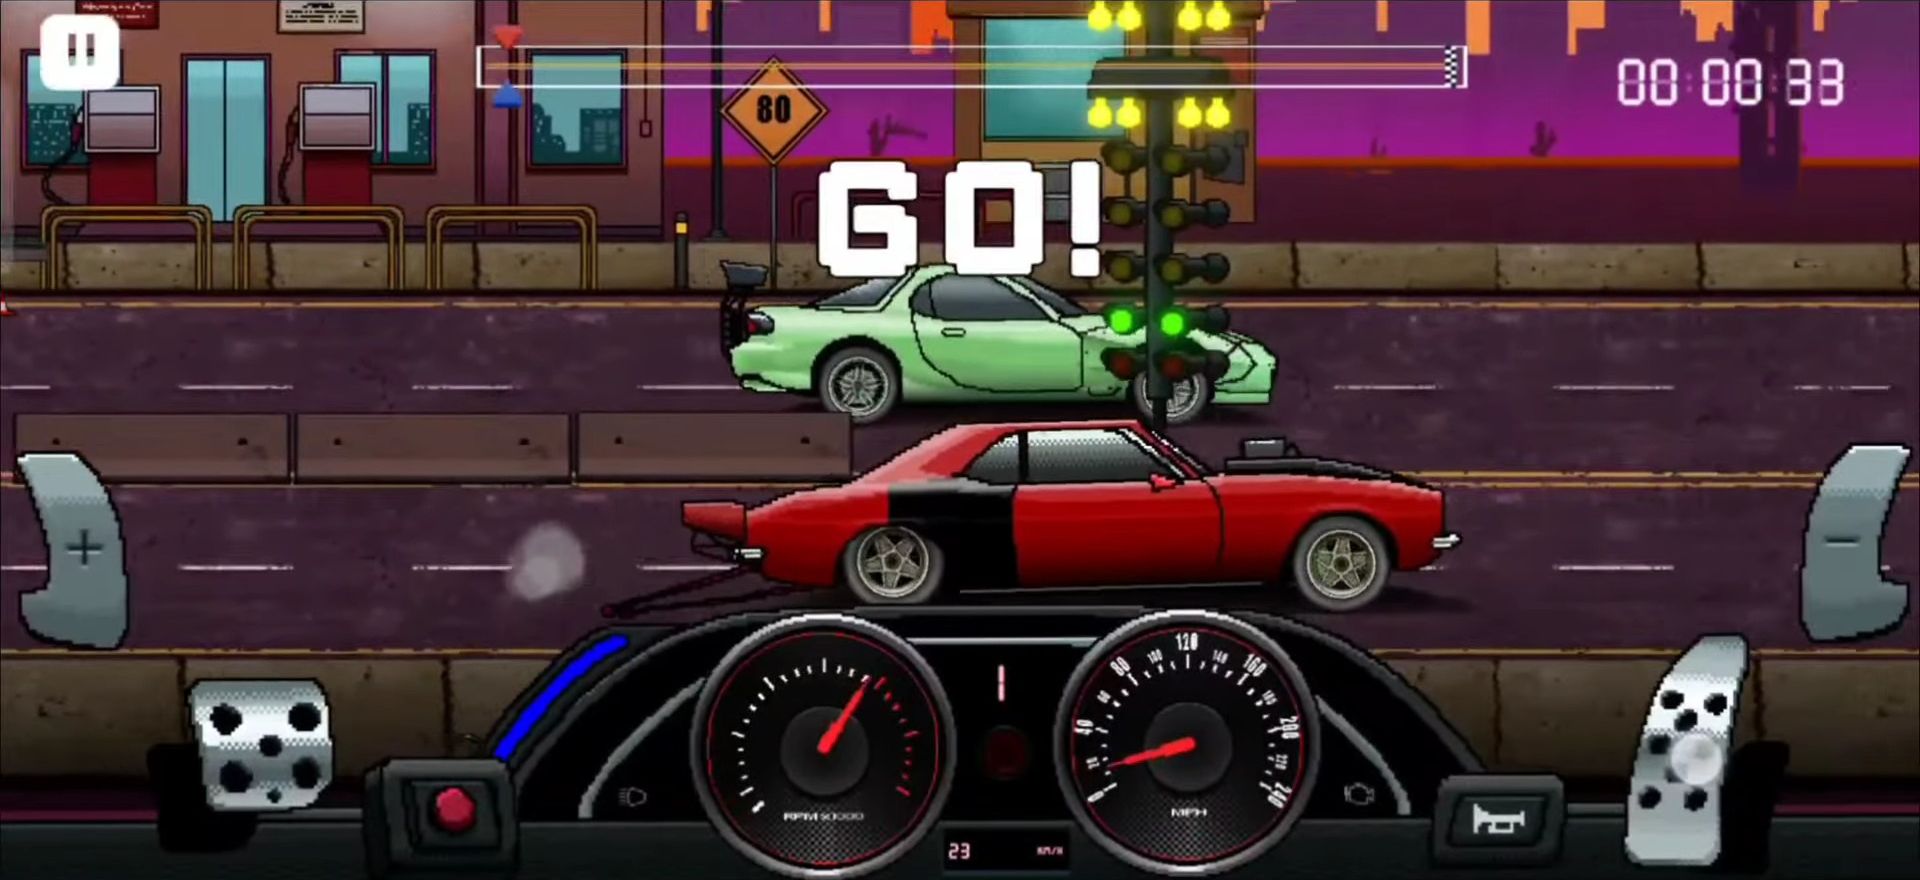 Gameplay of the Pixel X Racer for Android phone or tablet.